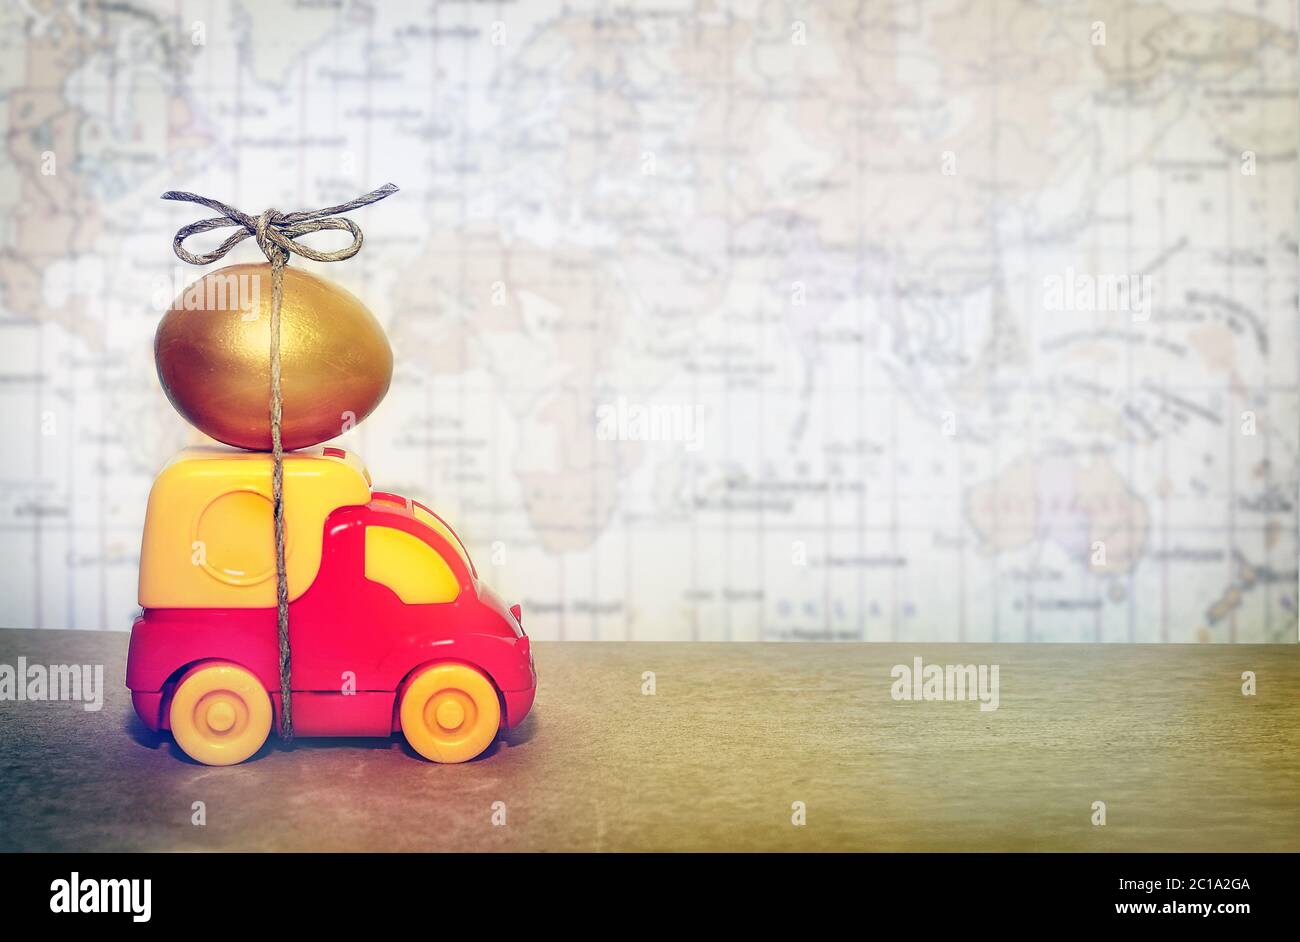 A toy truck carrying a golden egg, a symbol of the reliability of delivery of postal goods Stock Photo